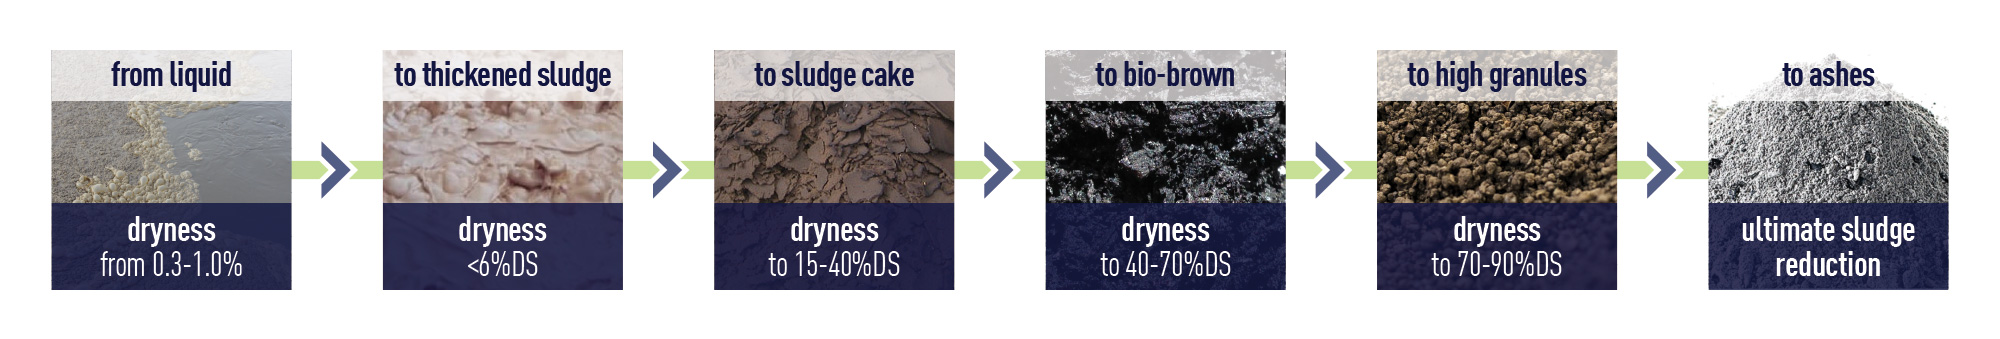 Sludge drying process by 6 stages